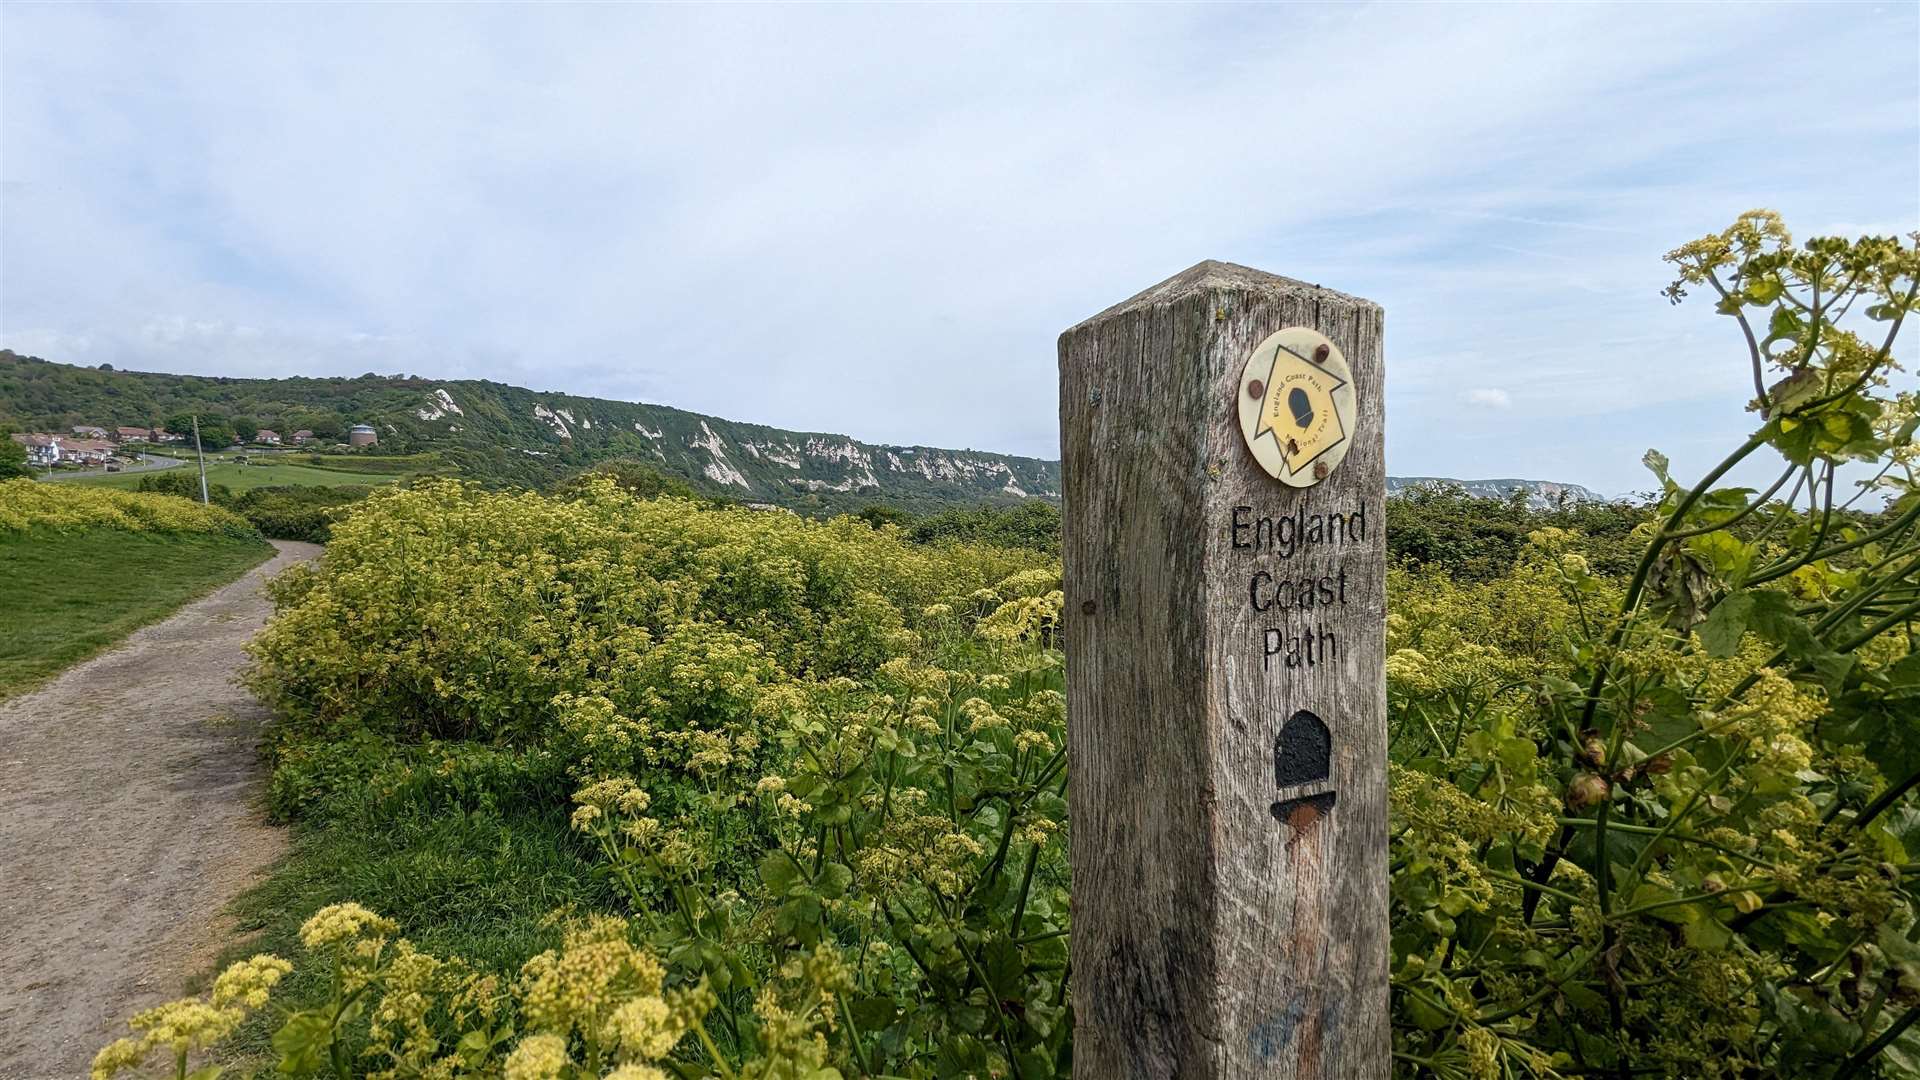 The coast path is well signposted throughout